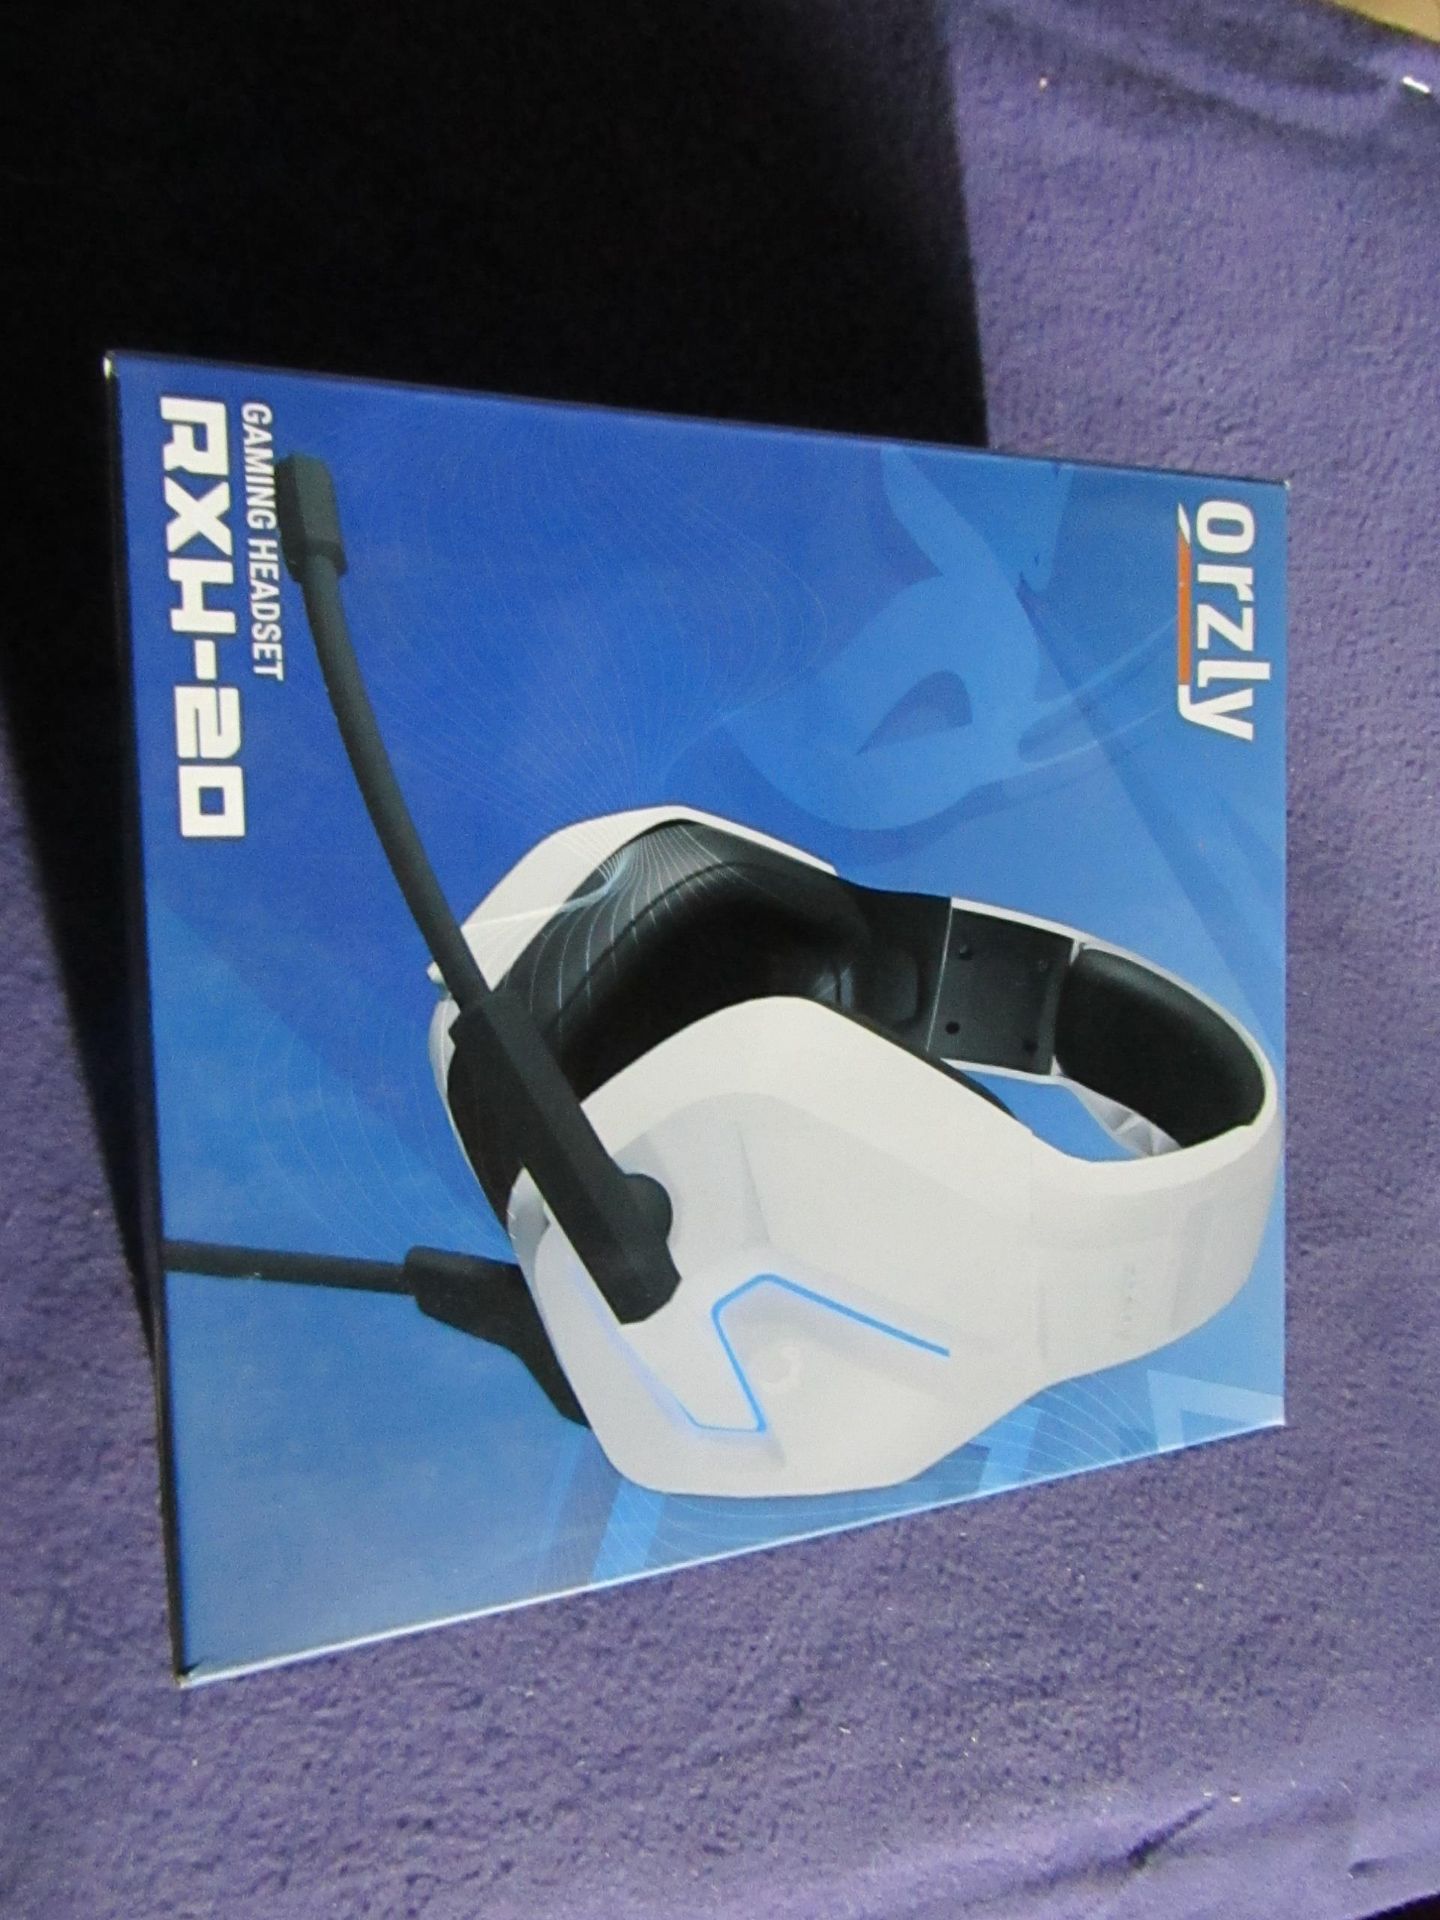 Orzly - RXH-20 White Gaming Headset - Unchecked & Boxed.